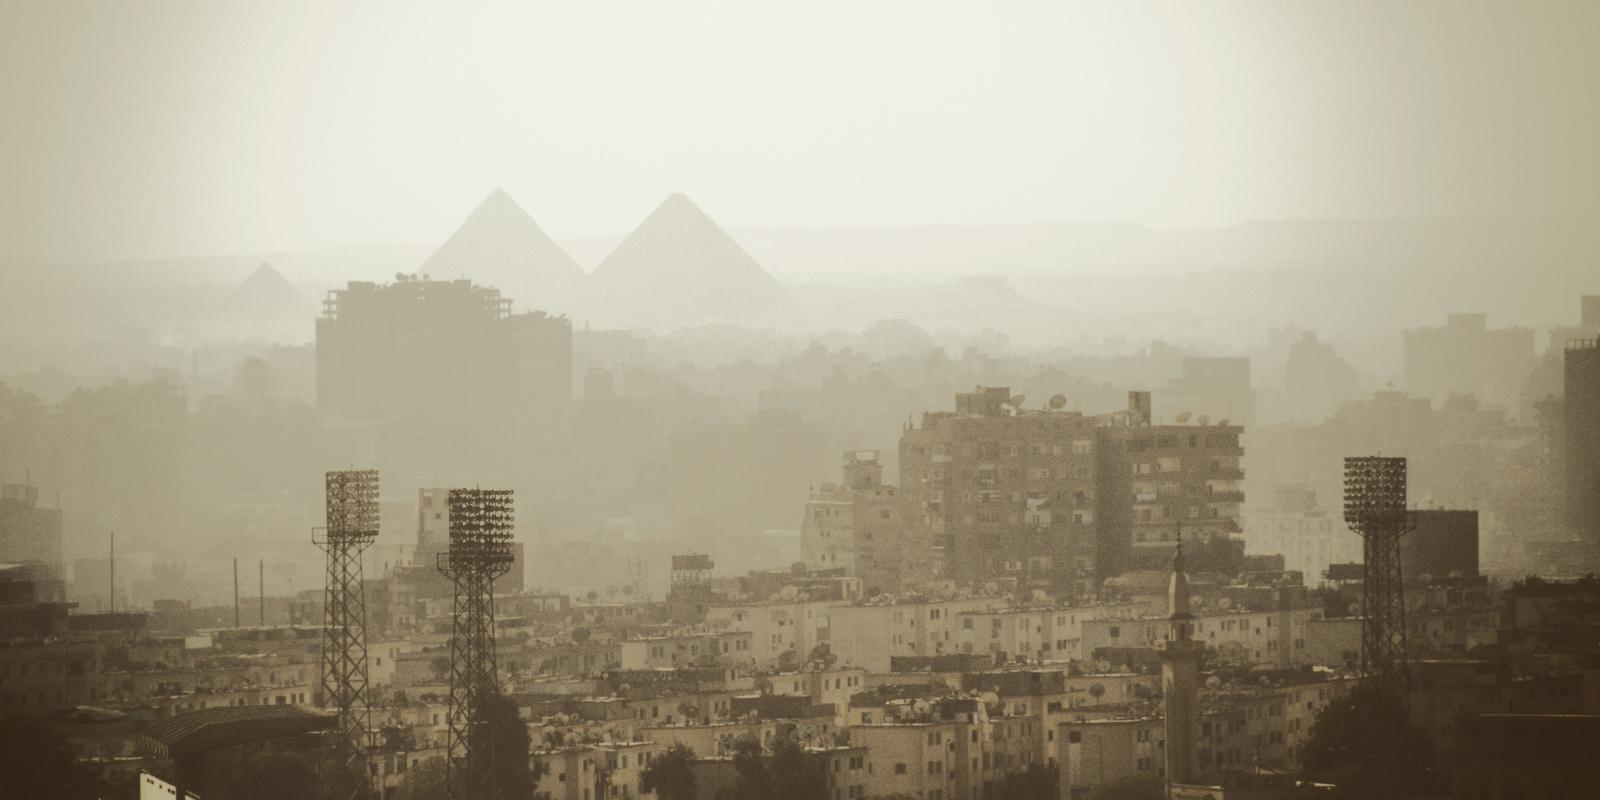 Cairo's skyline at the pyramids of Giza showing its pollution